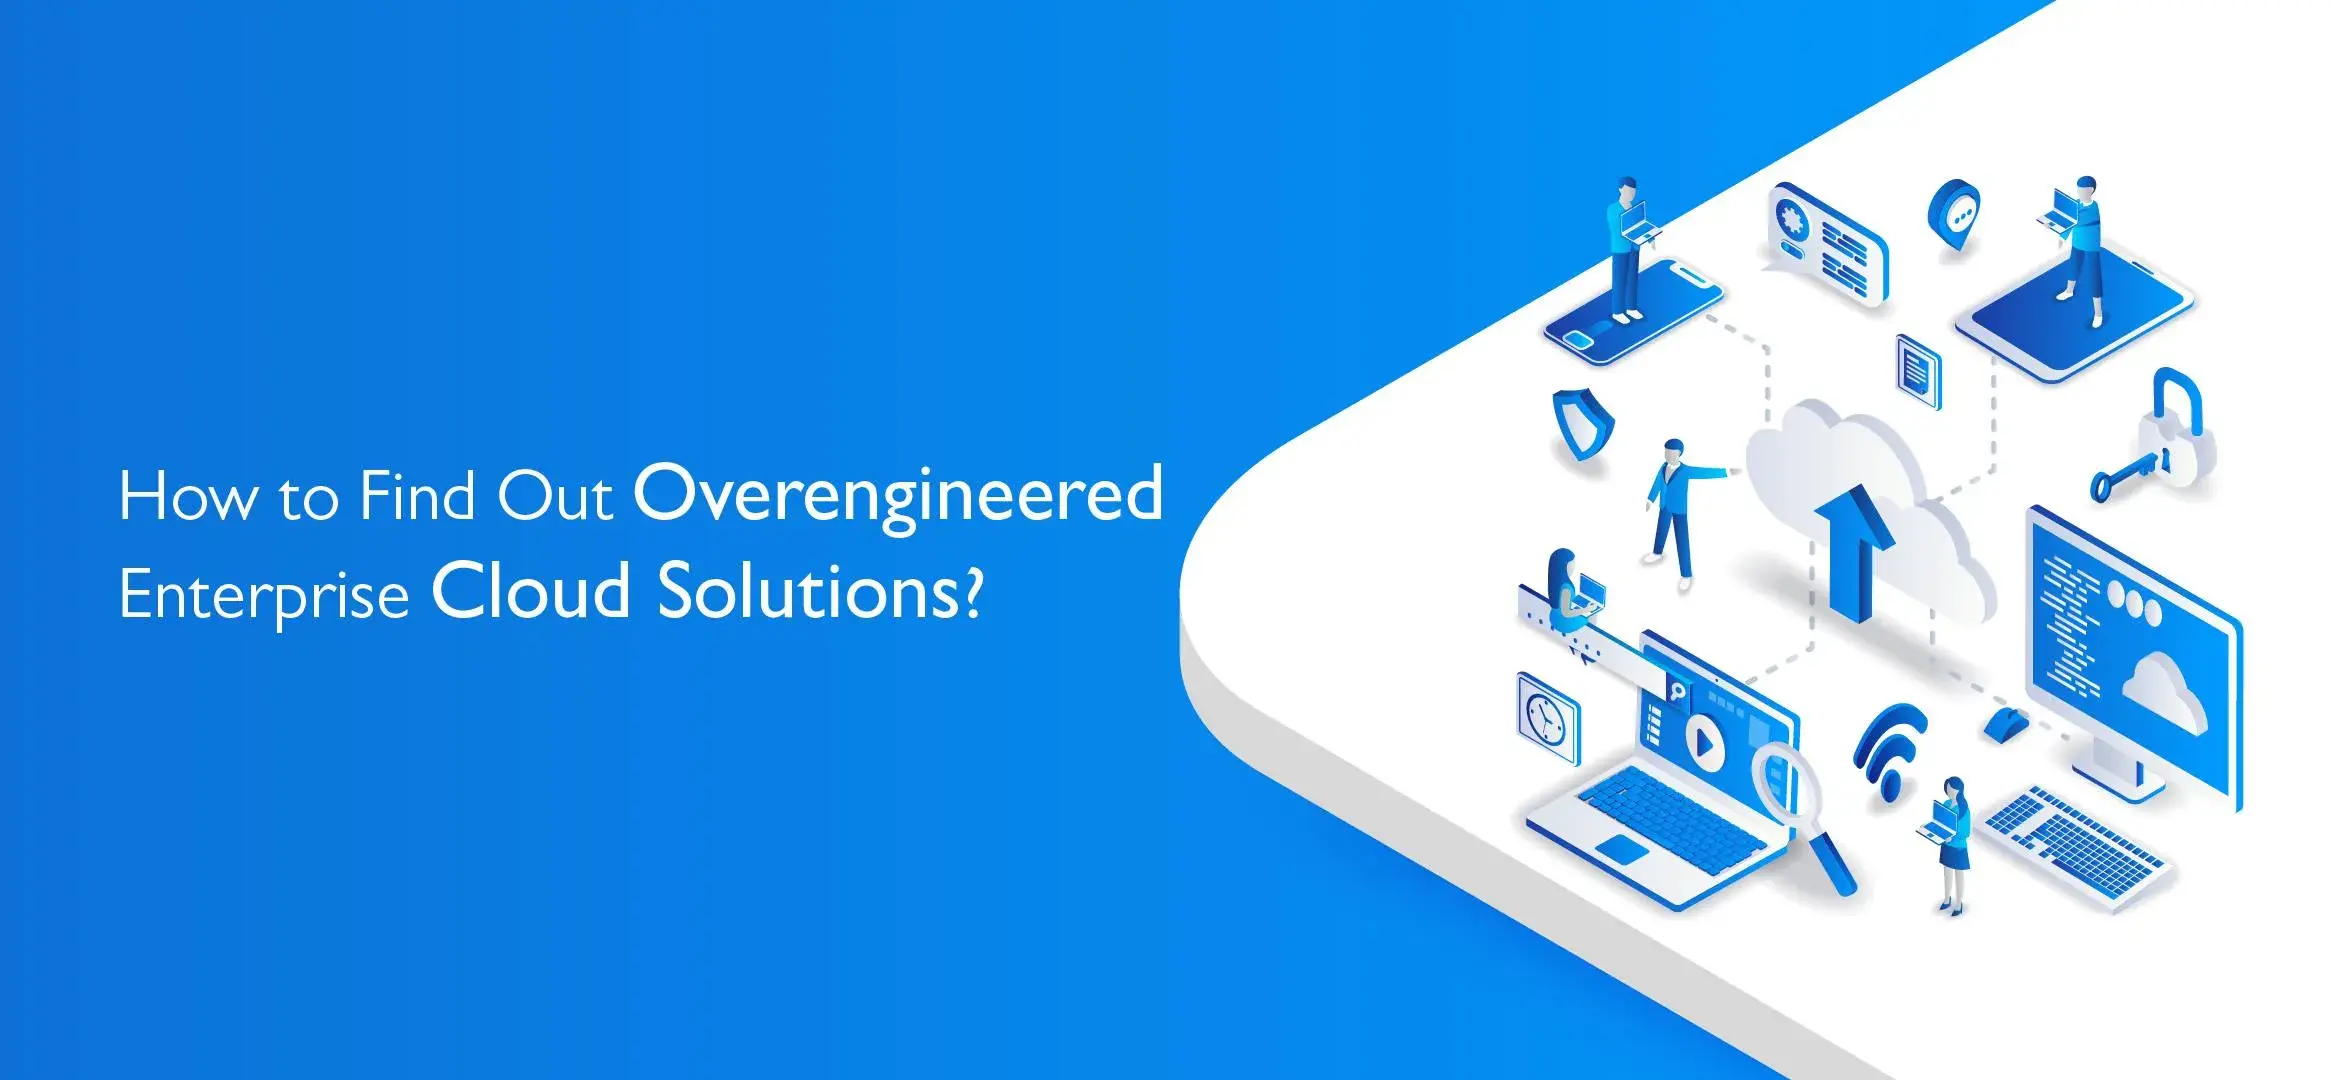 1712233369How to Find Out Overengineered Enterprise Cloud Solutions.webp